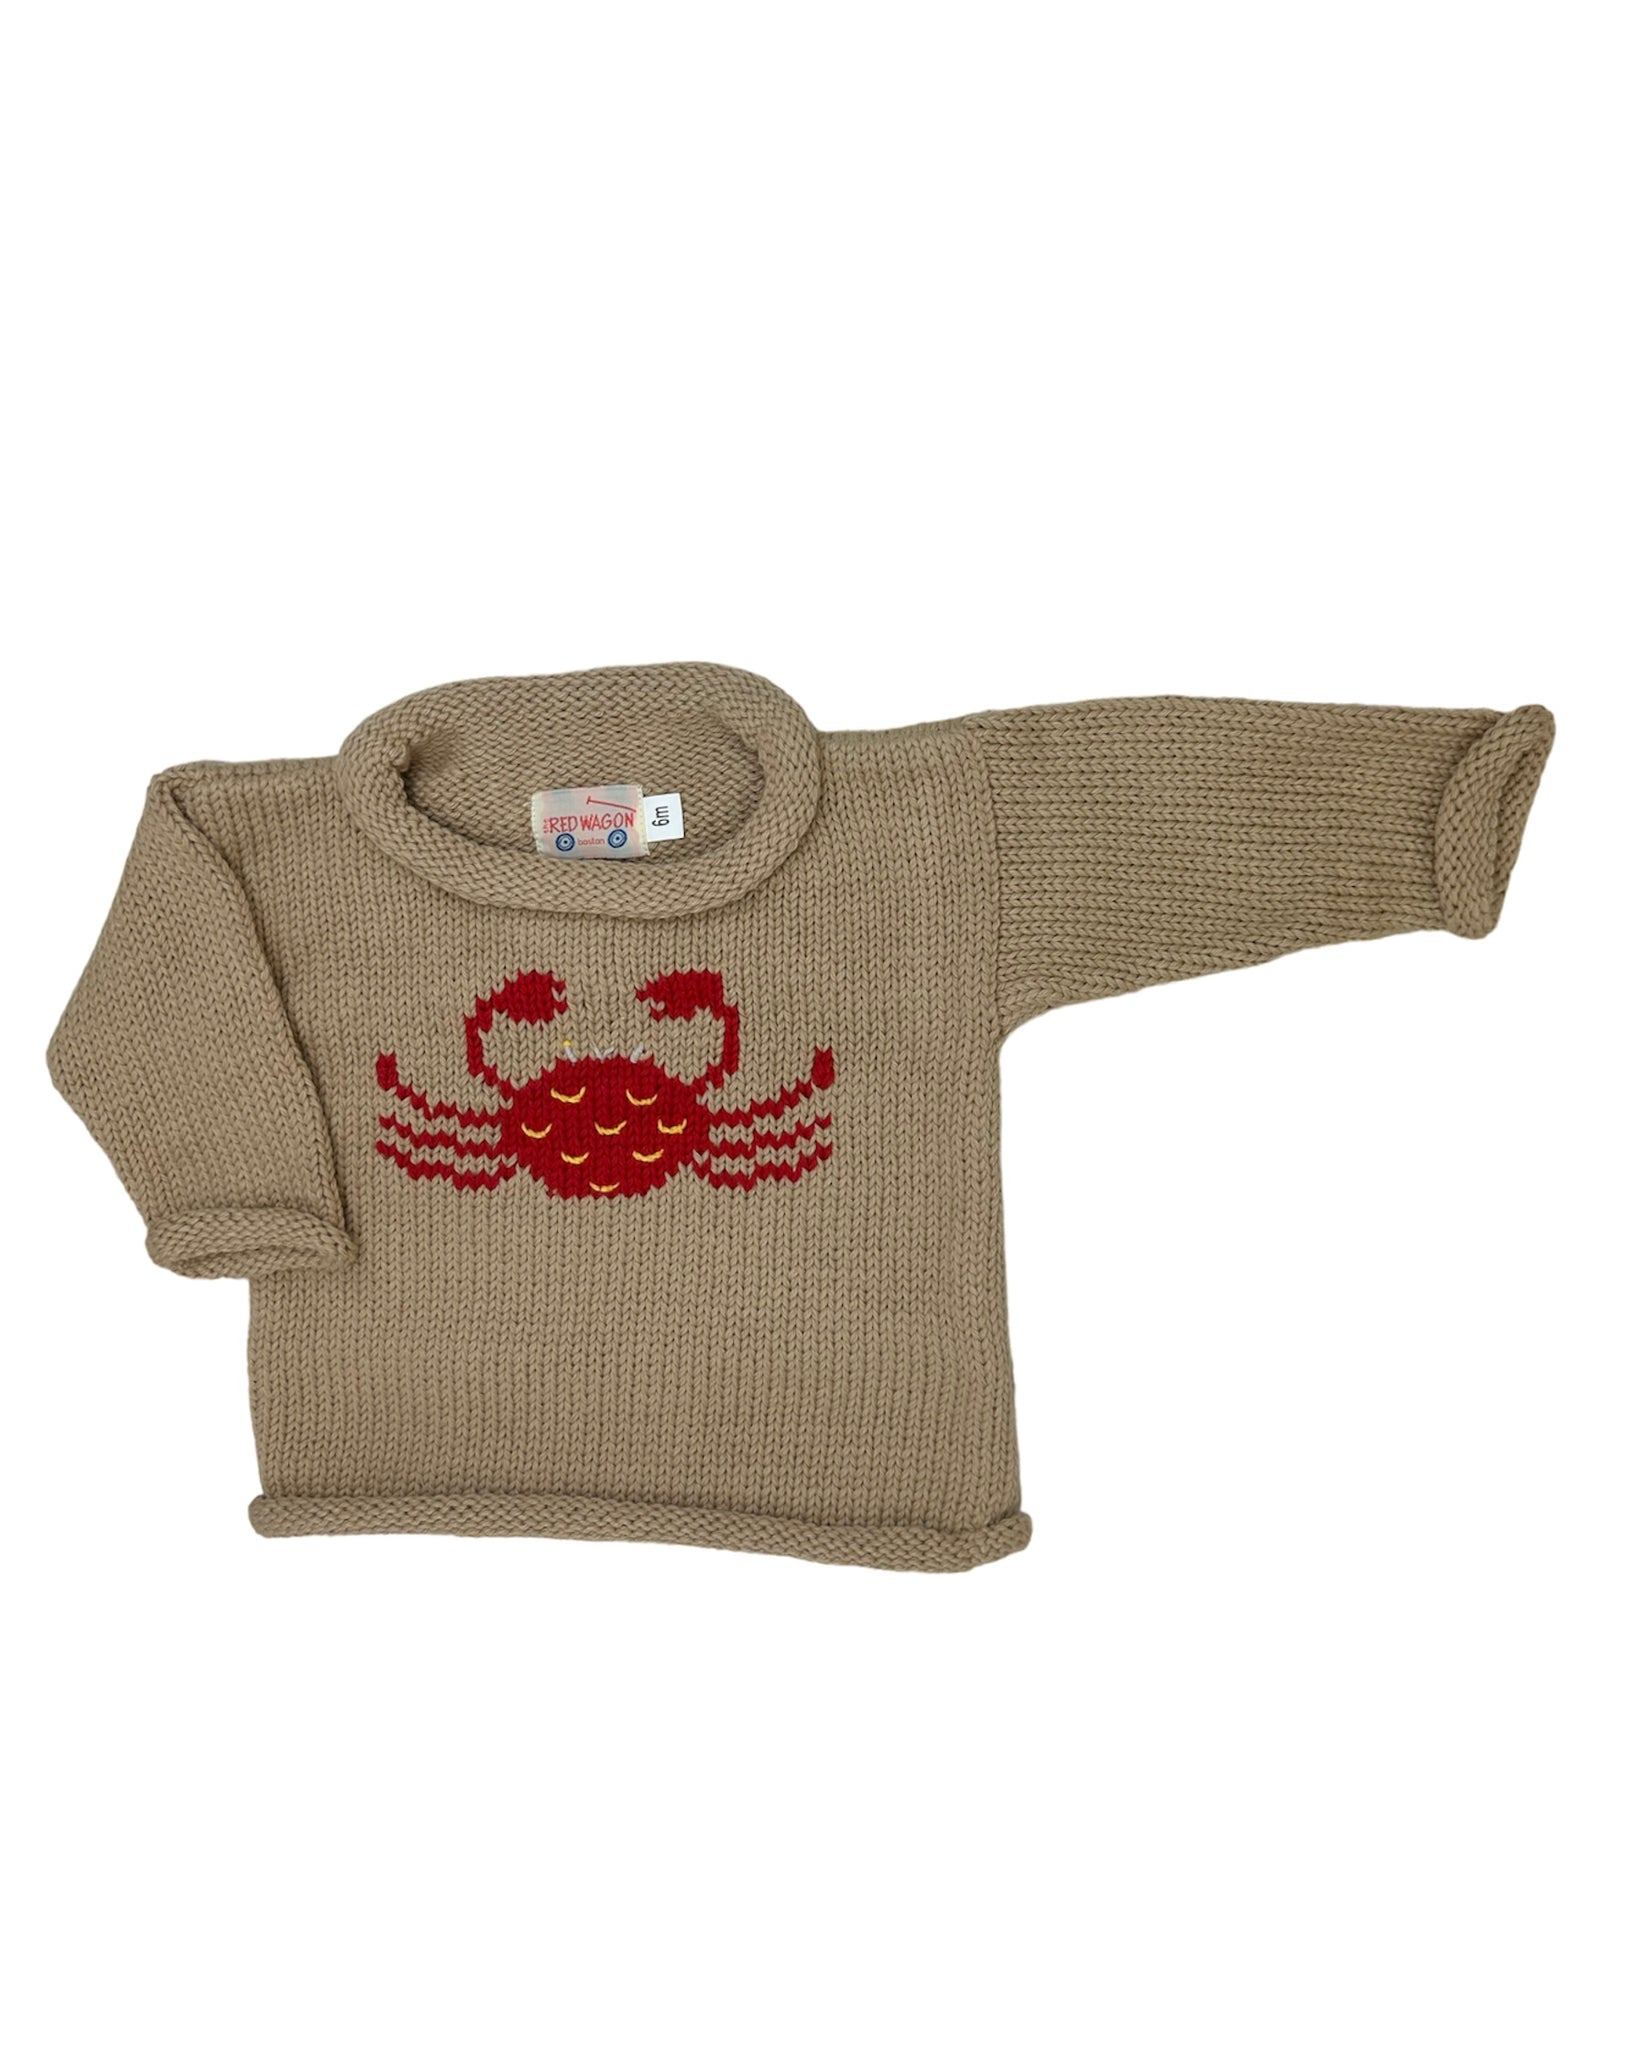 tan long sleeve sweater with red crab